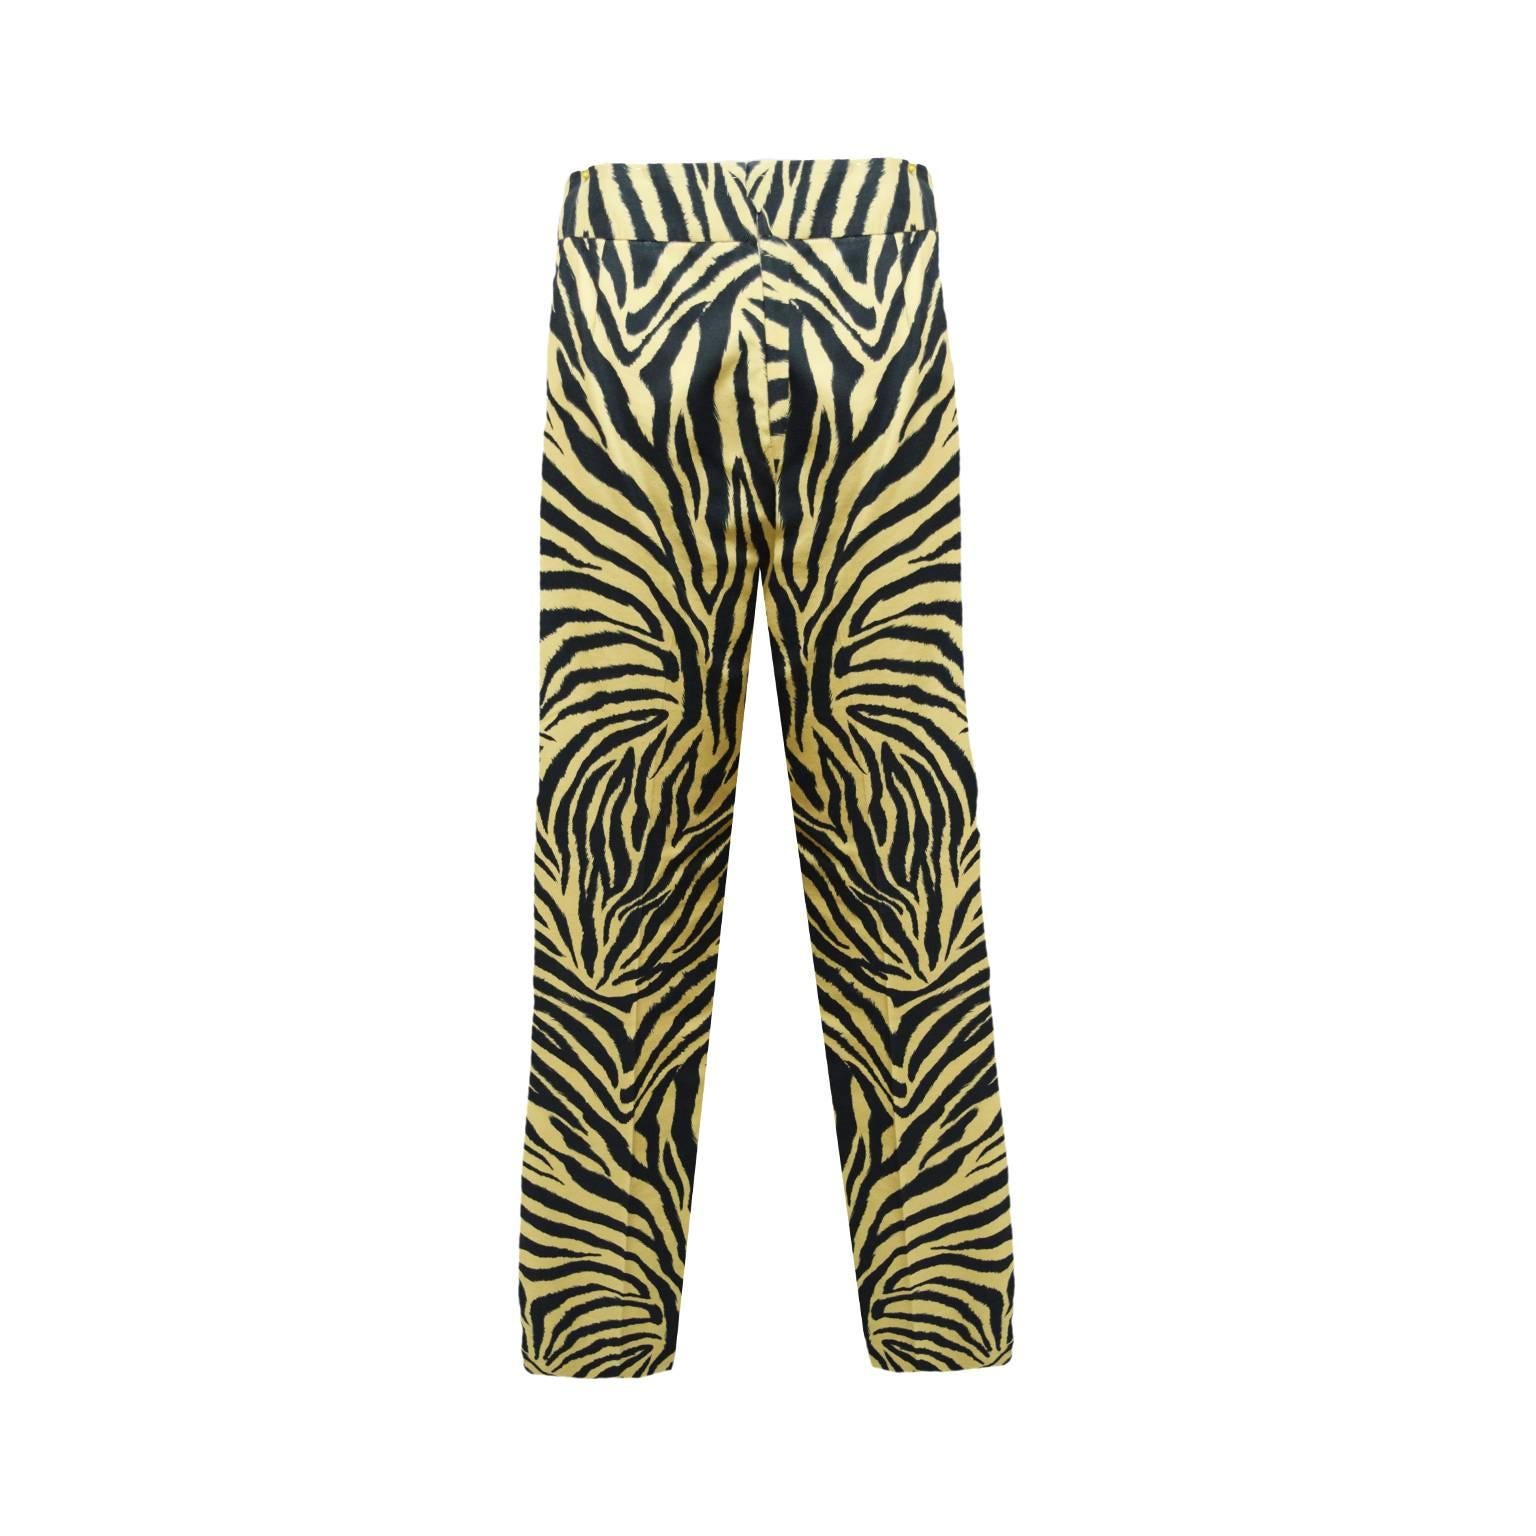 These pants by Carolina Herrera are a off yellow and zebra print. The leg of the pant is slim and they are 100% cotton. The side of the pants have a zipped closure and eye and hook 